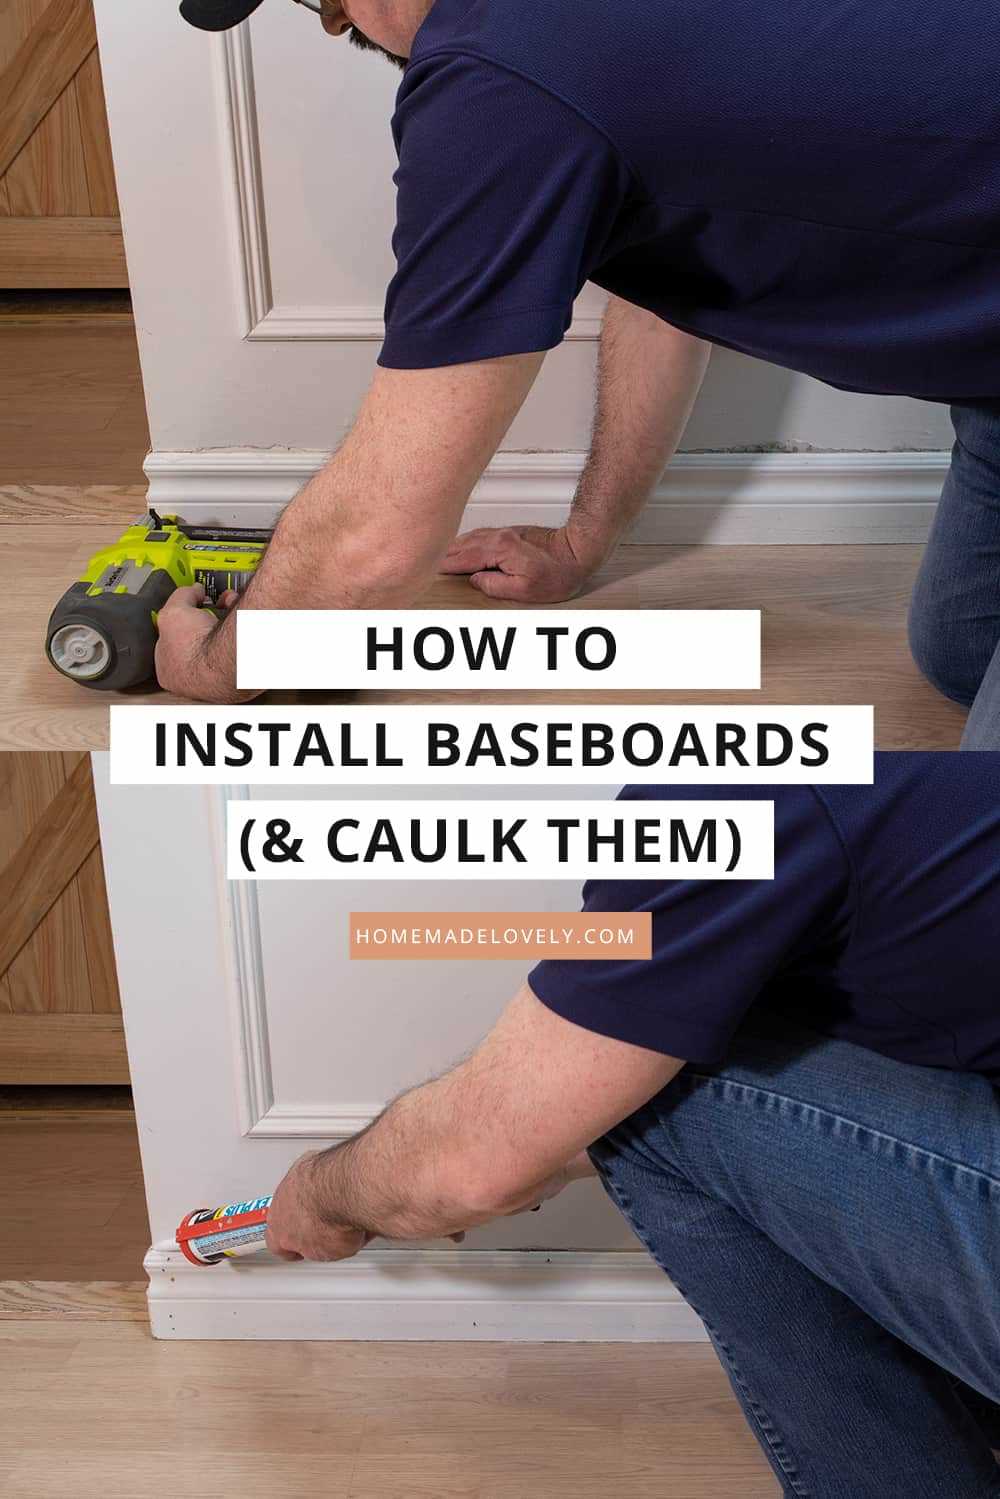 Step 1: Measure and Cut the Baseboards